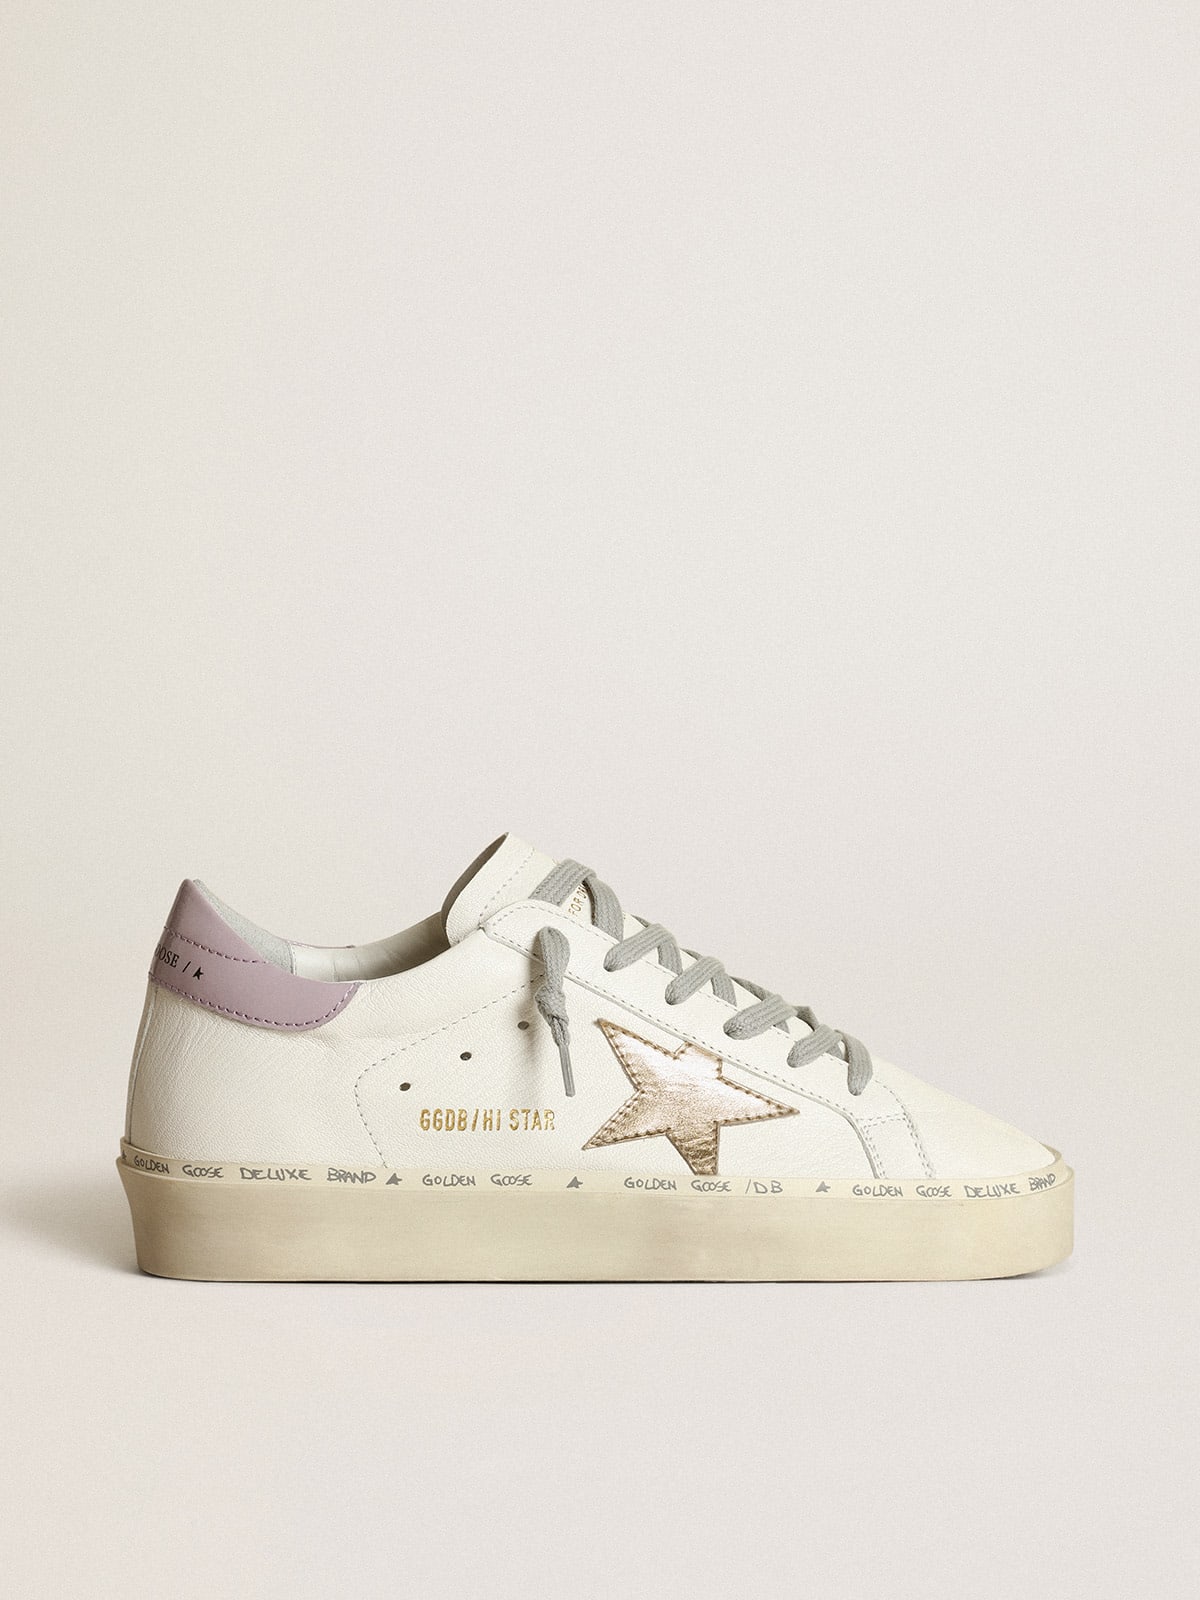 White Hi Star with a gold star and lilac naplak heel tab